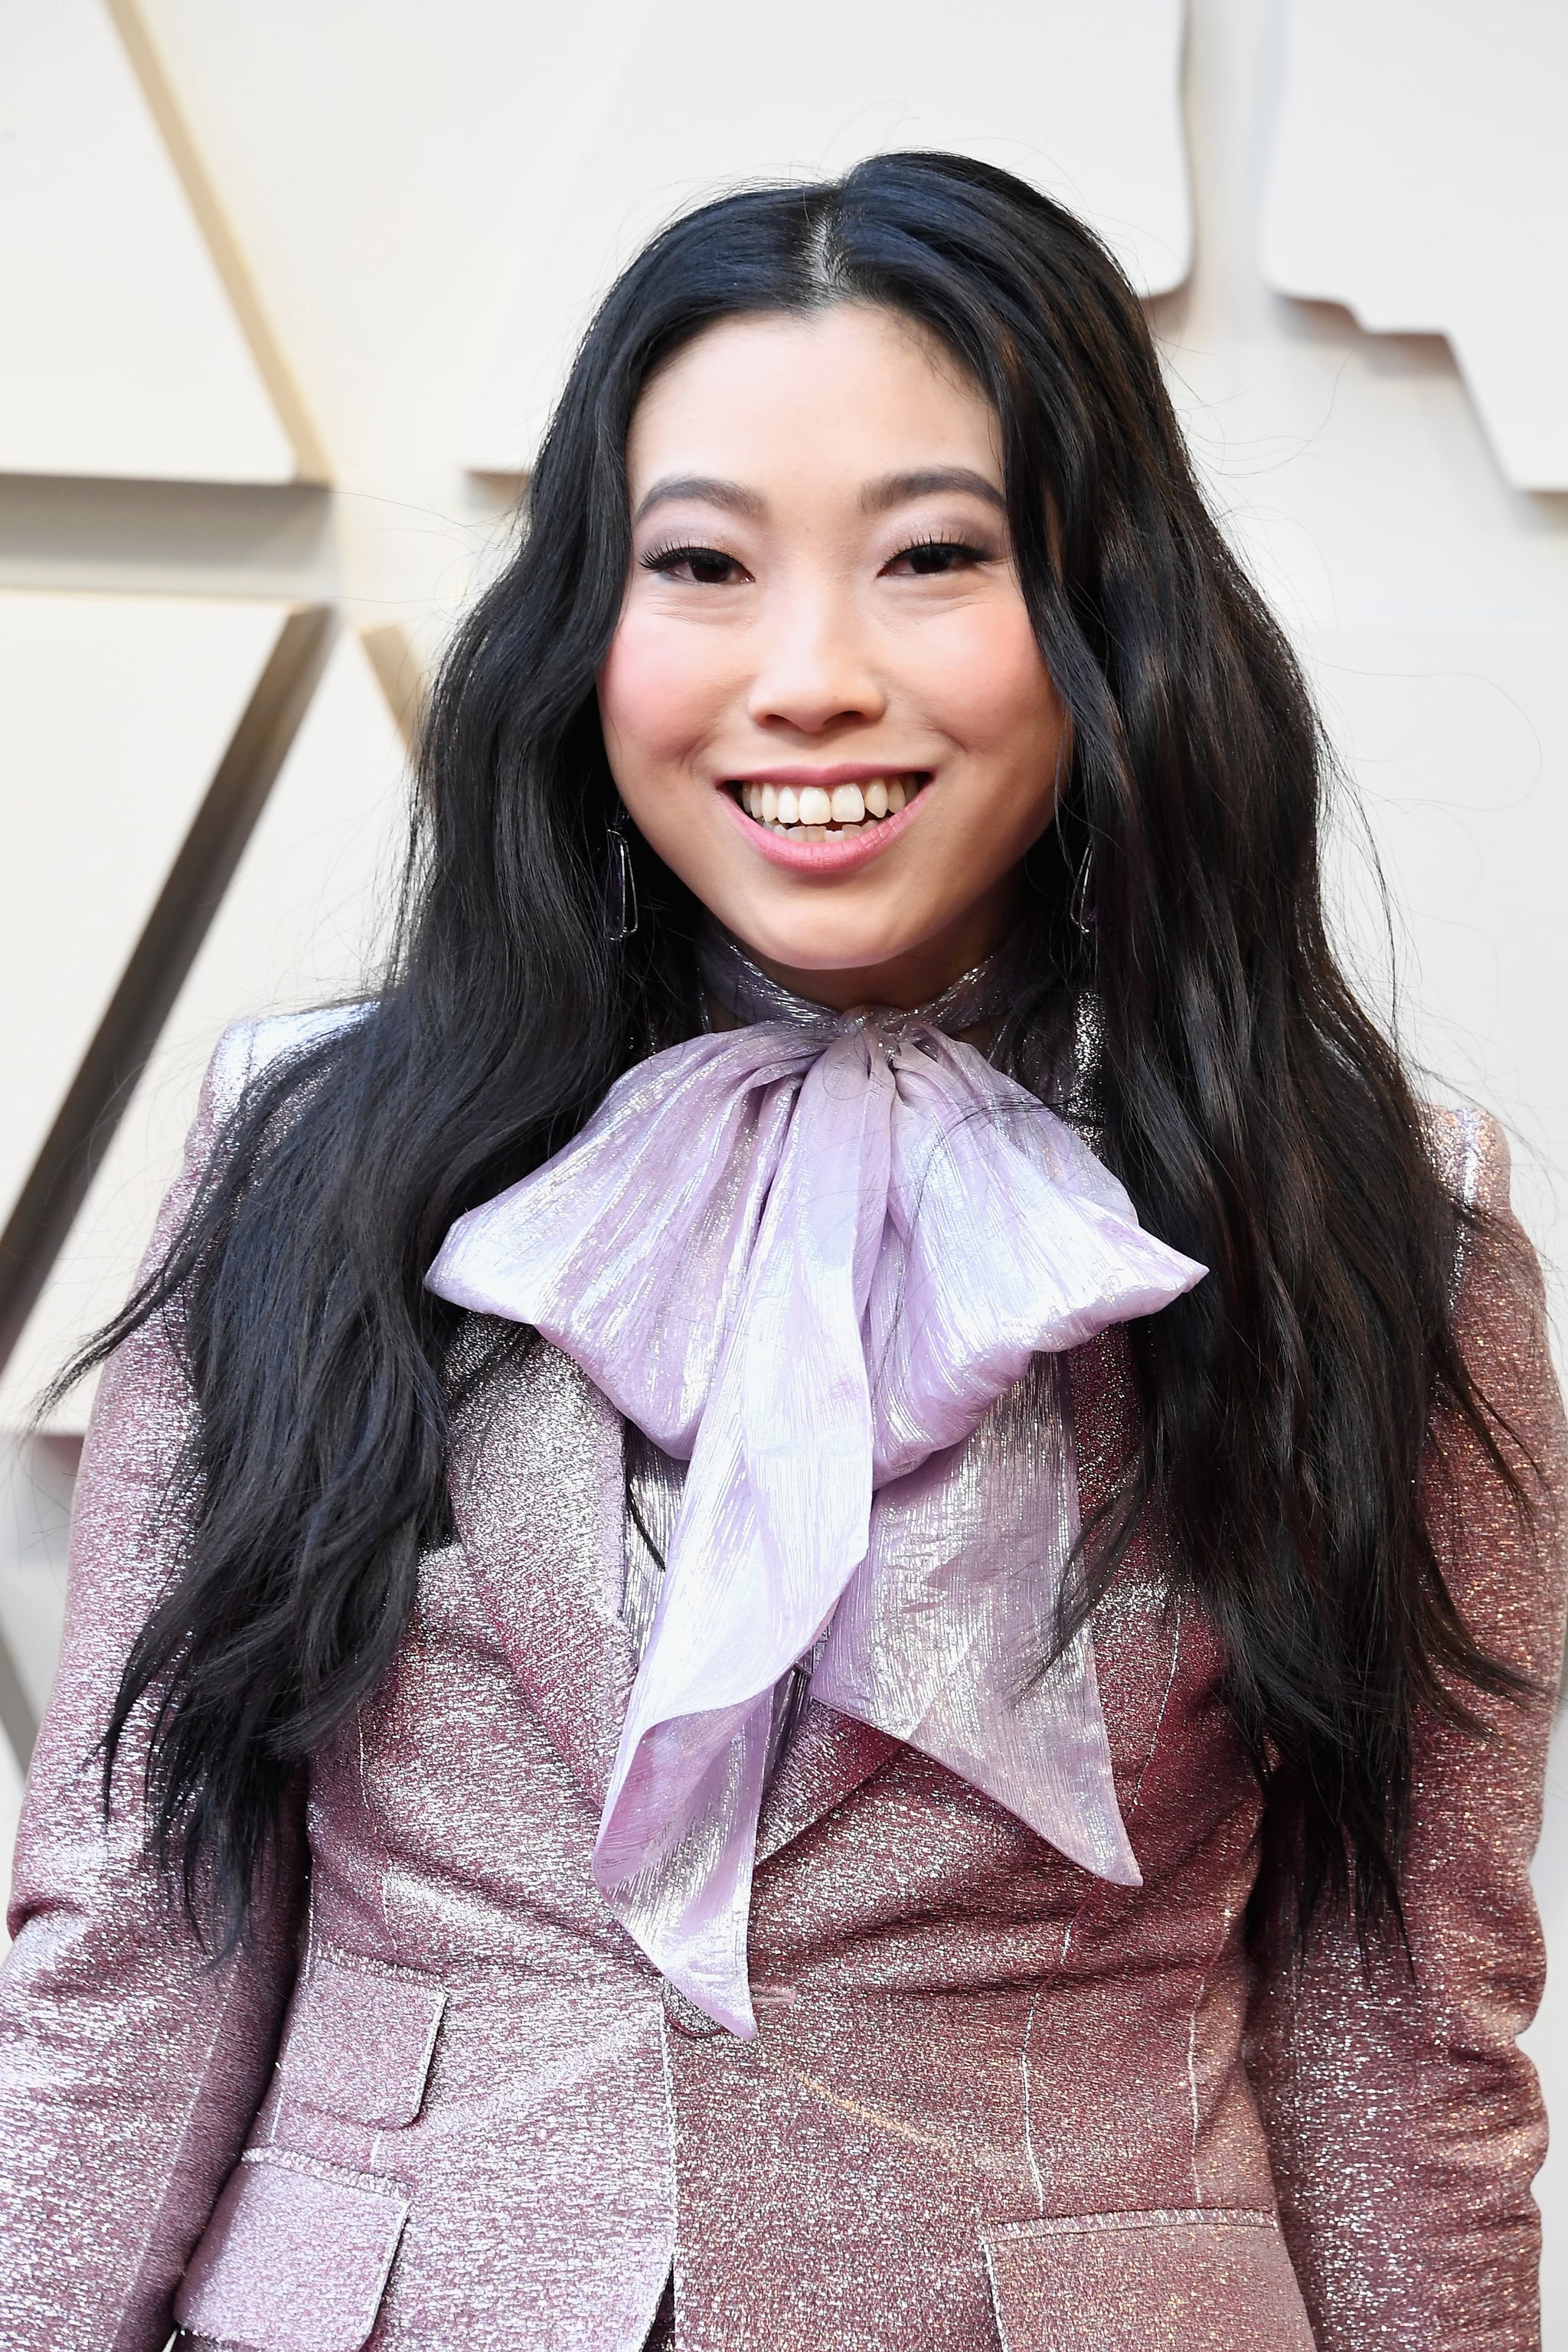 HOLLYWOOD, CA - FEBRUARY 24:  Awkwafina  attends the 91st Annual Academy Awards at Hollywood and Highland on February 24, 2019 in Hollywood, California.  (Photo by Steve Granitz/WireImage)